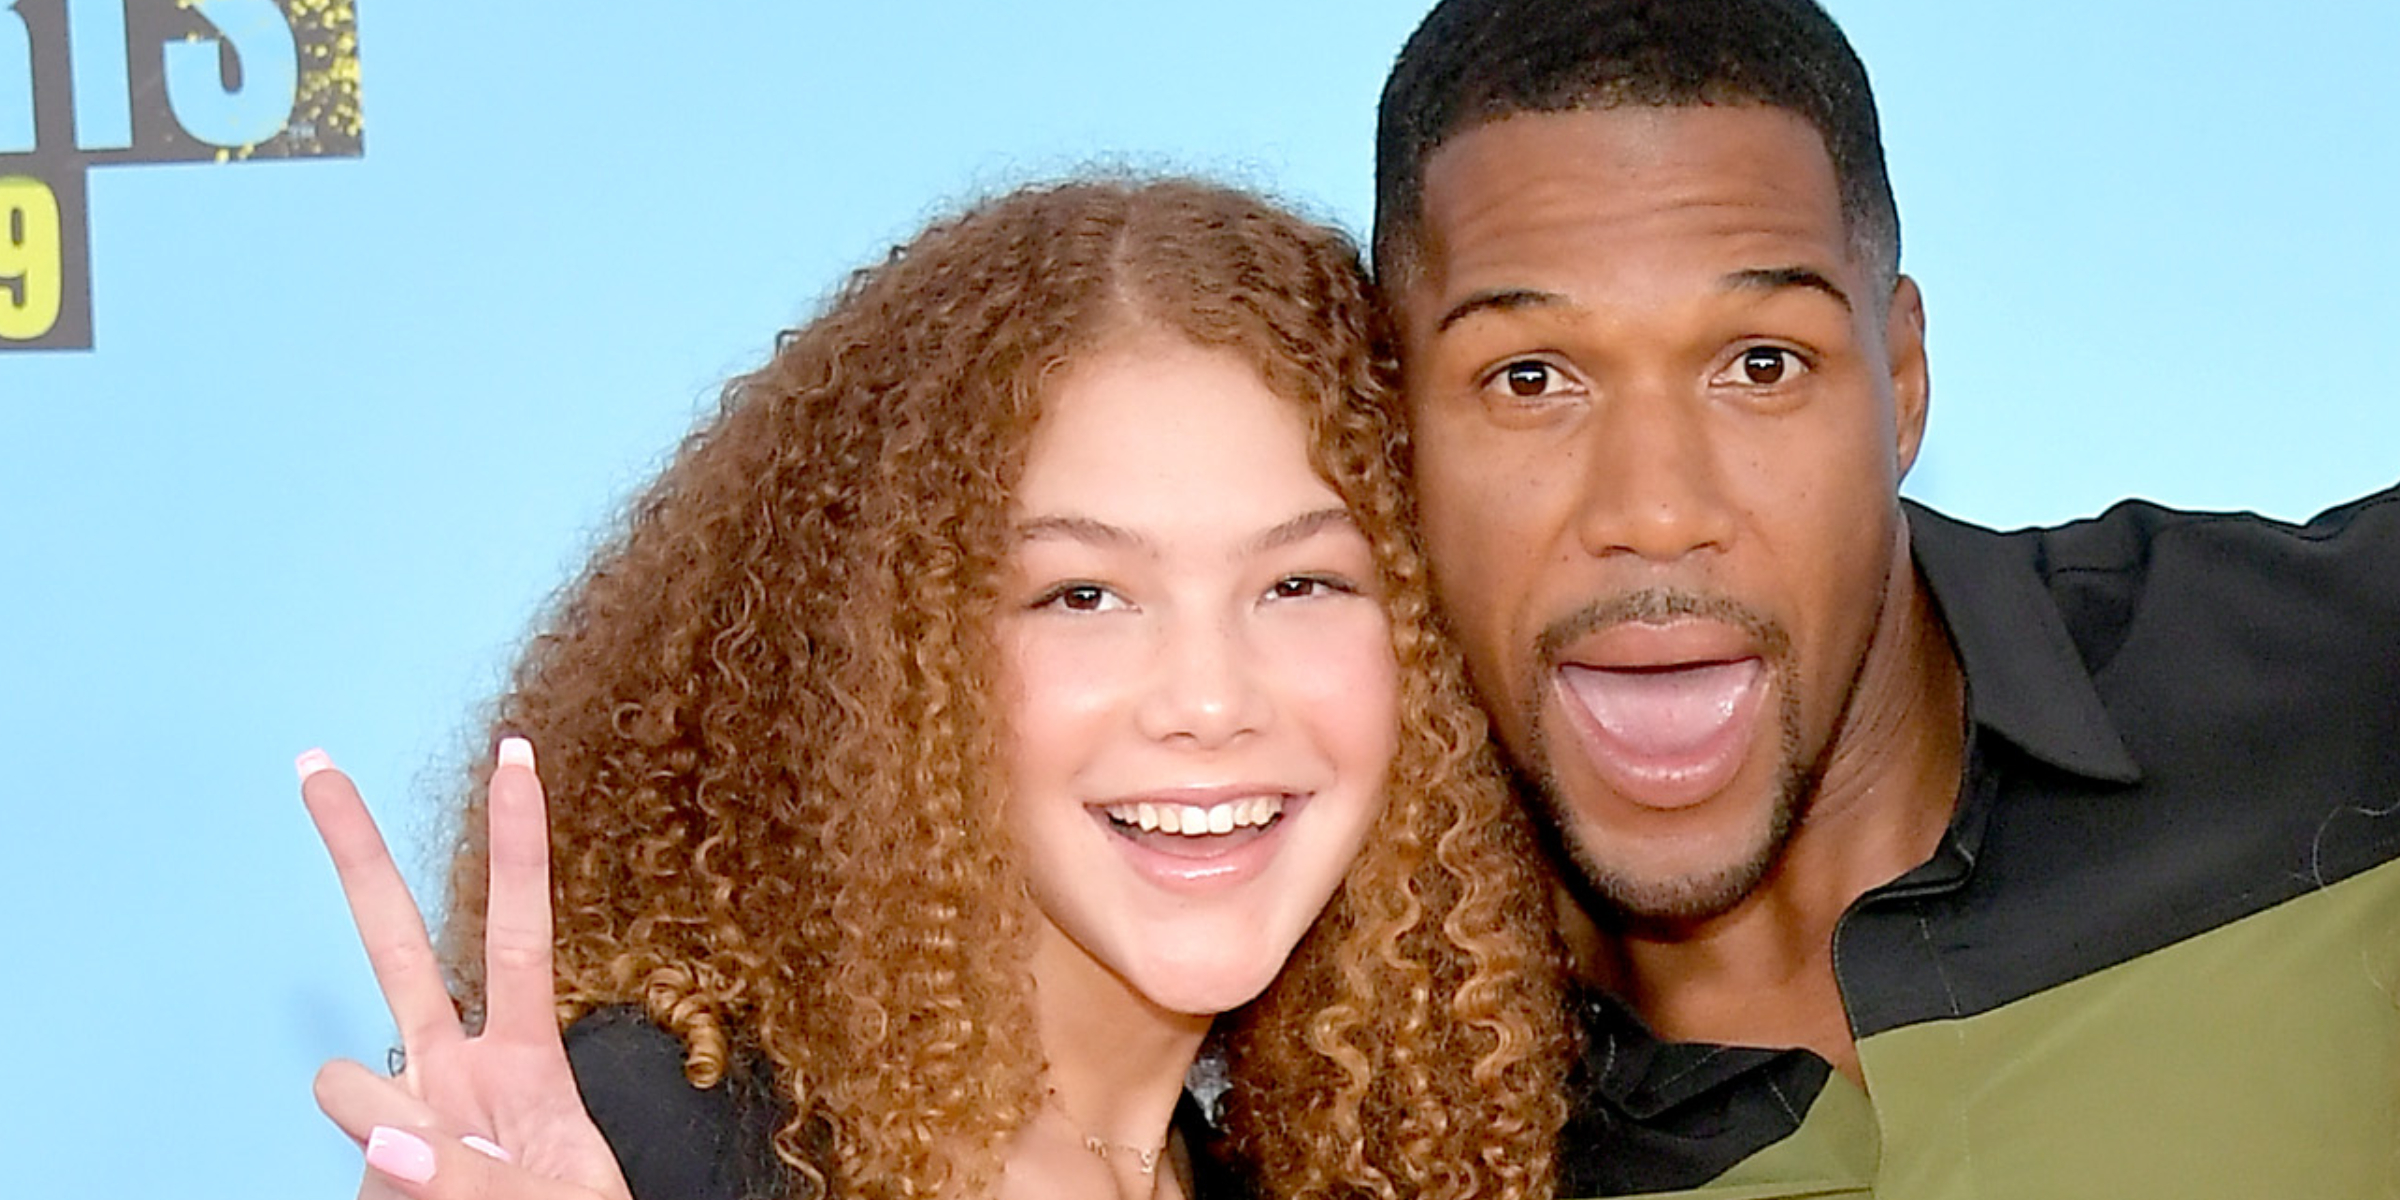 Michael Strahan and his daughter, Isabella | Source: Getty Images